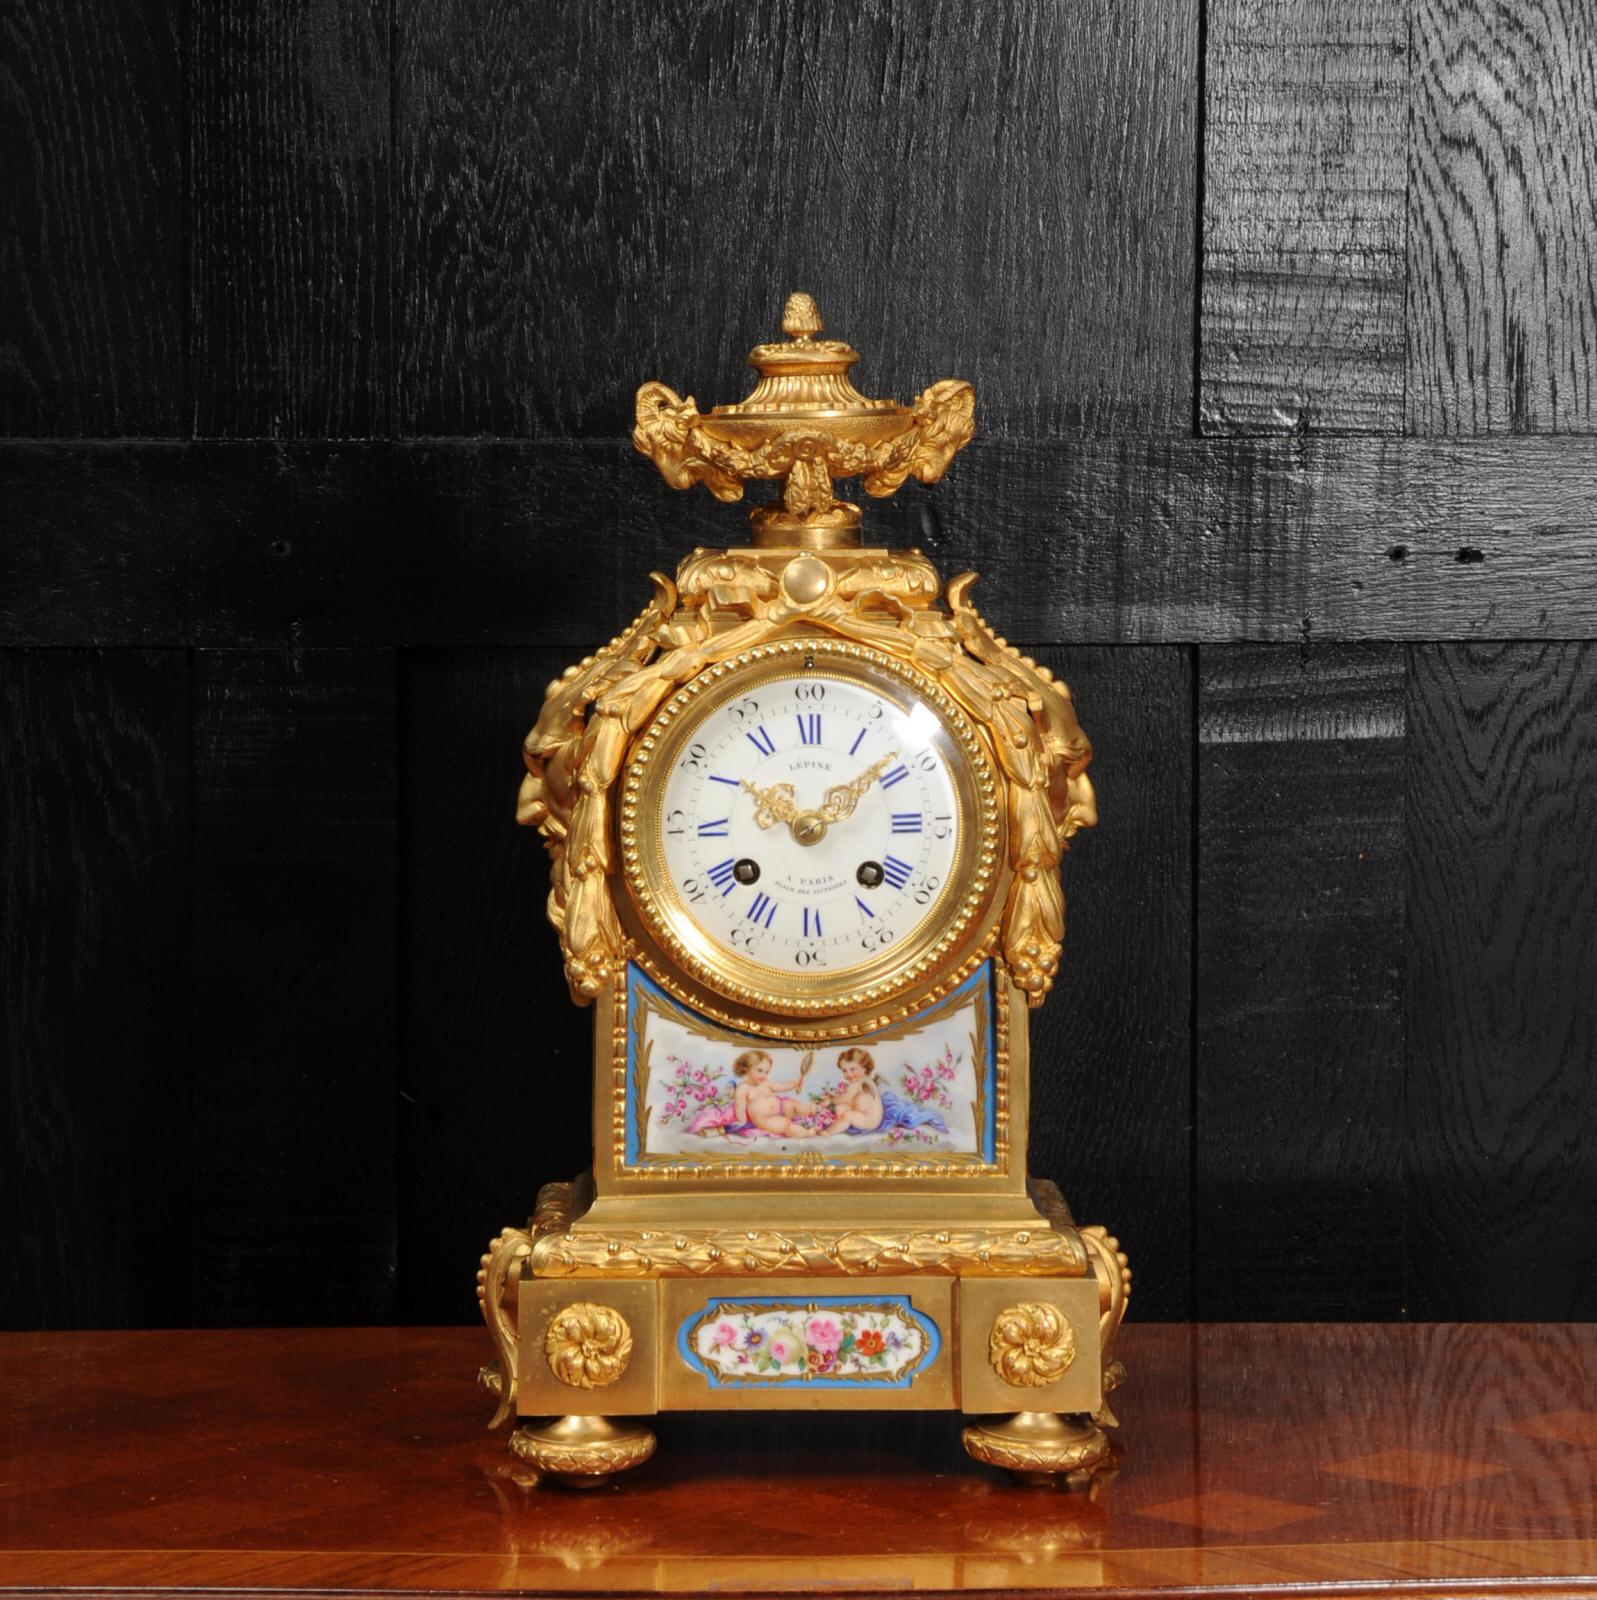 Gilt Early Ormolu and Sevres Porcelain Antique French Clock by Lepine Paris